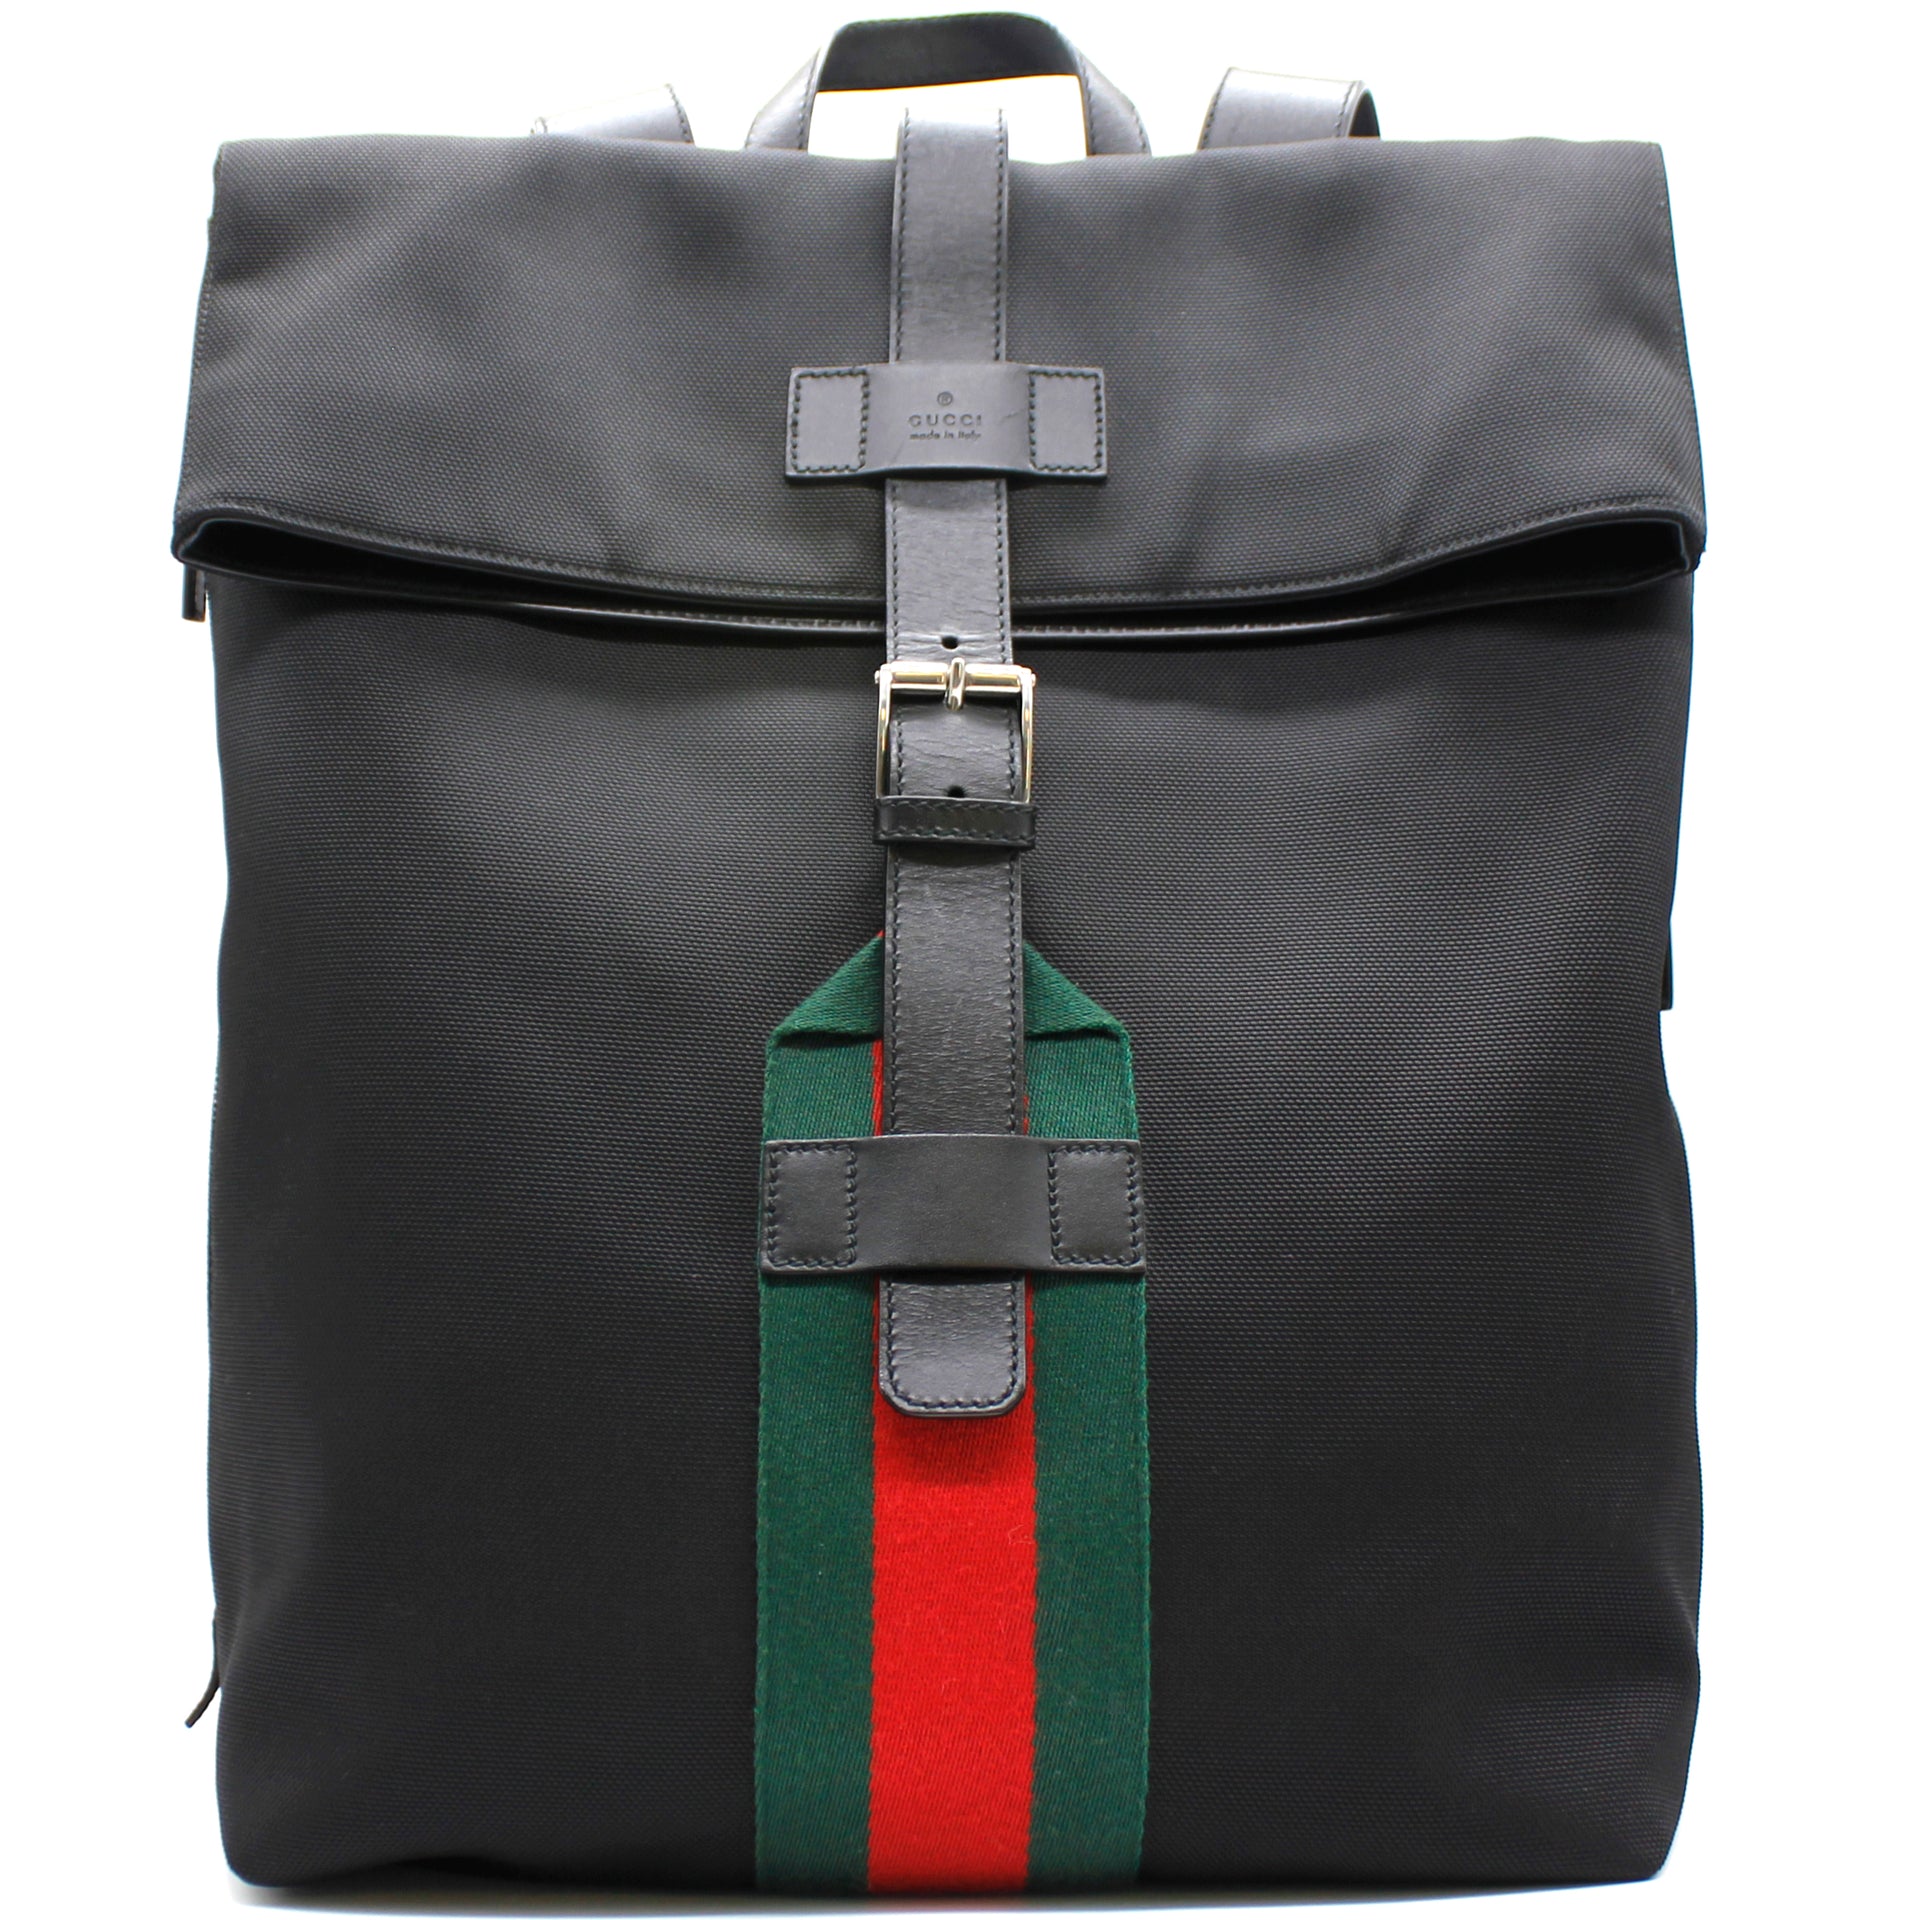 GUCCI Backpacks Sale, Up To 70% Off